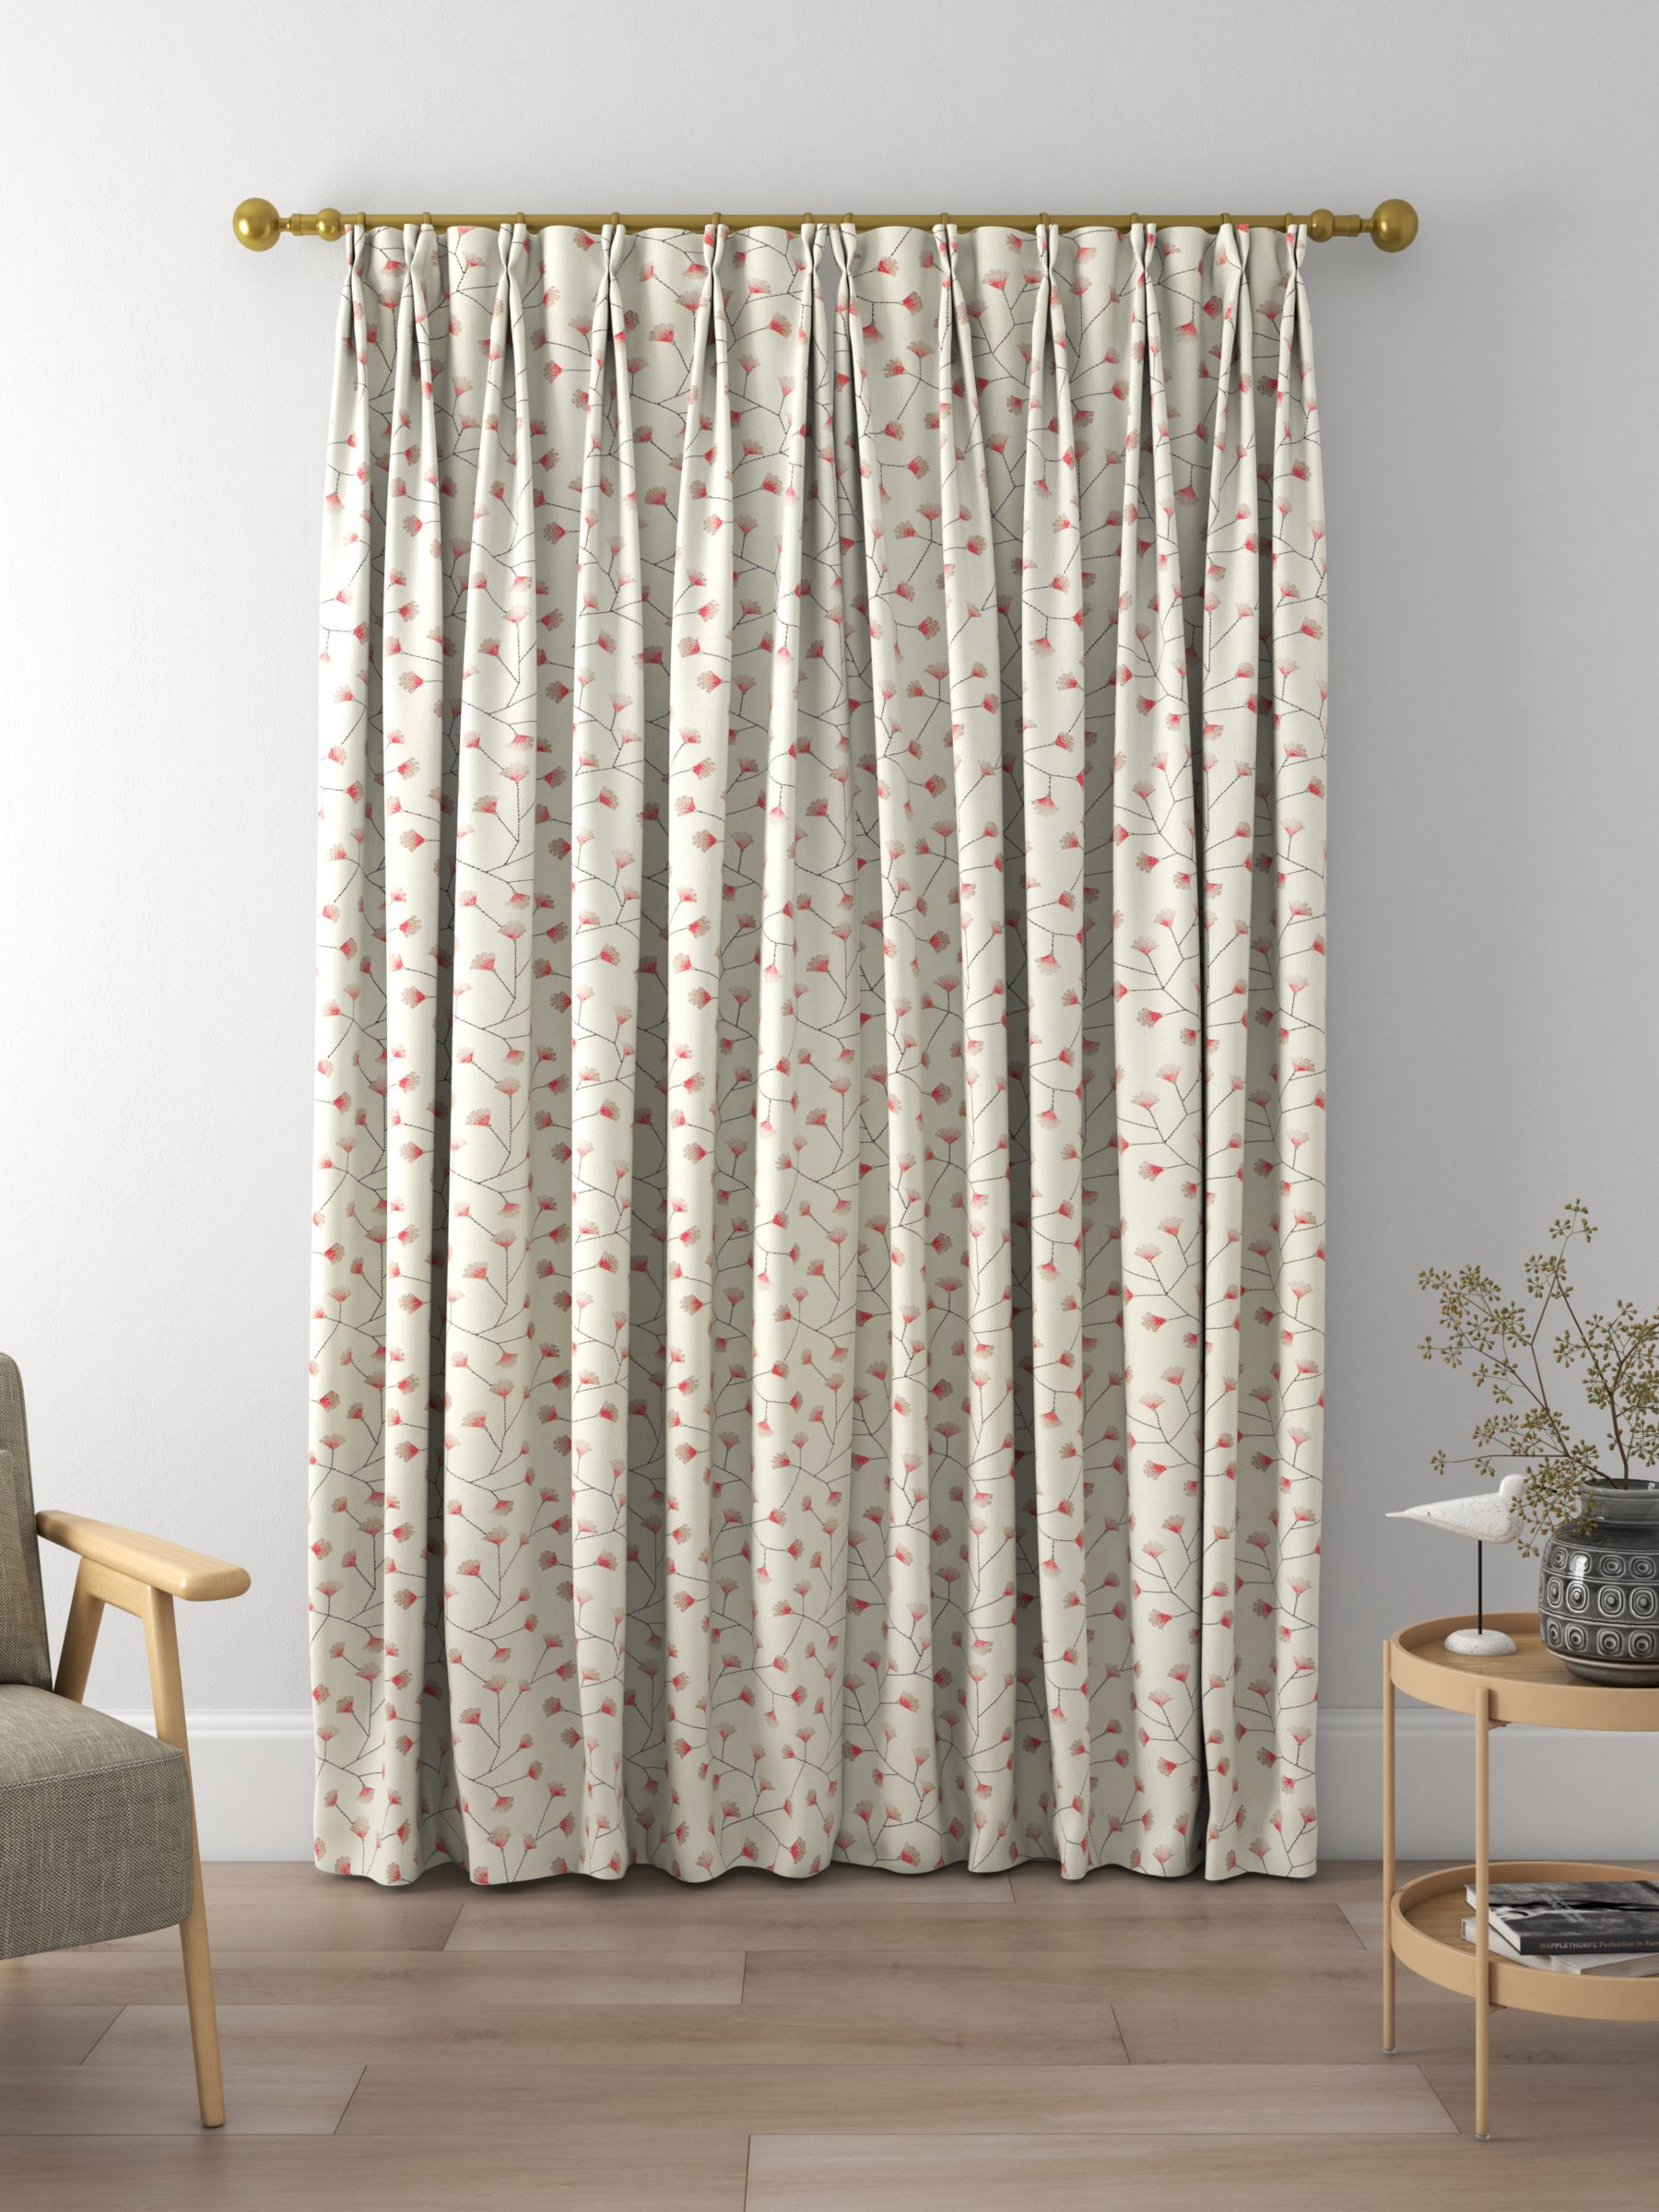 Sanderson Gingko Trail Made to Measure Curtains, Coral/Celadon